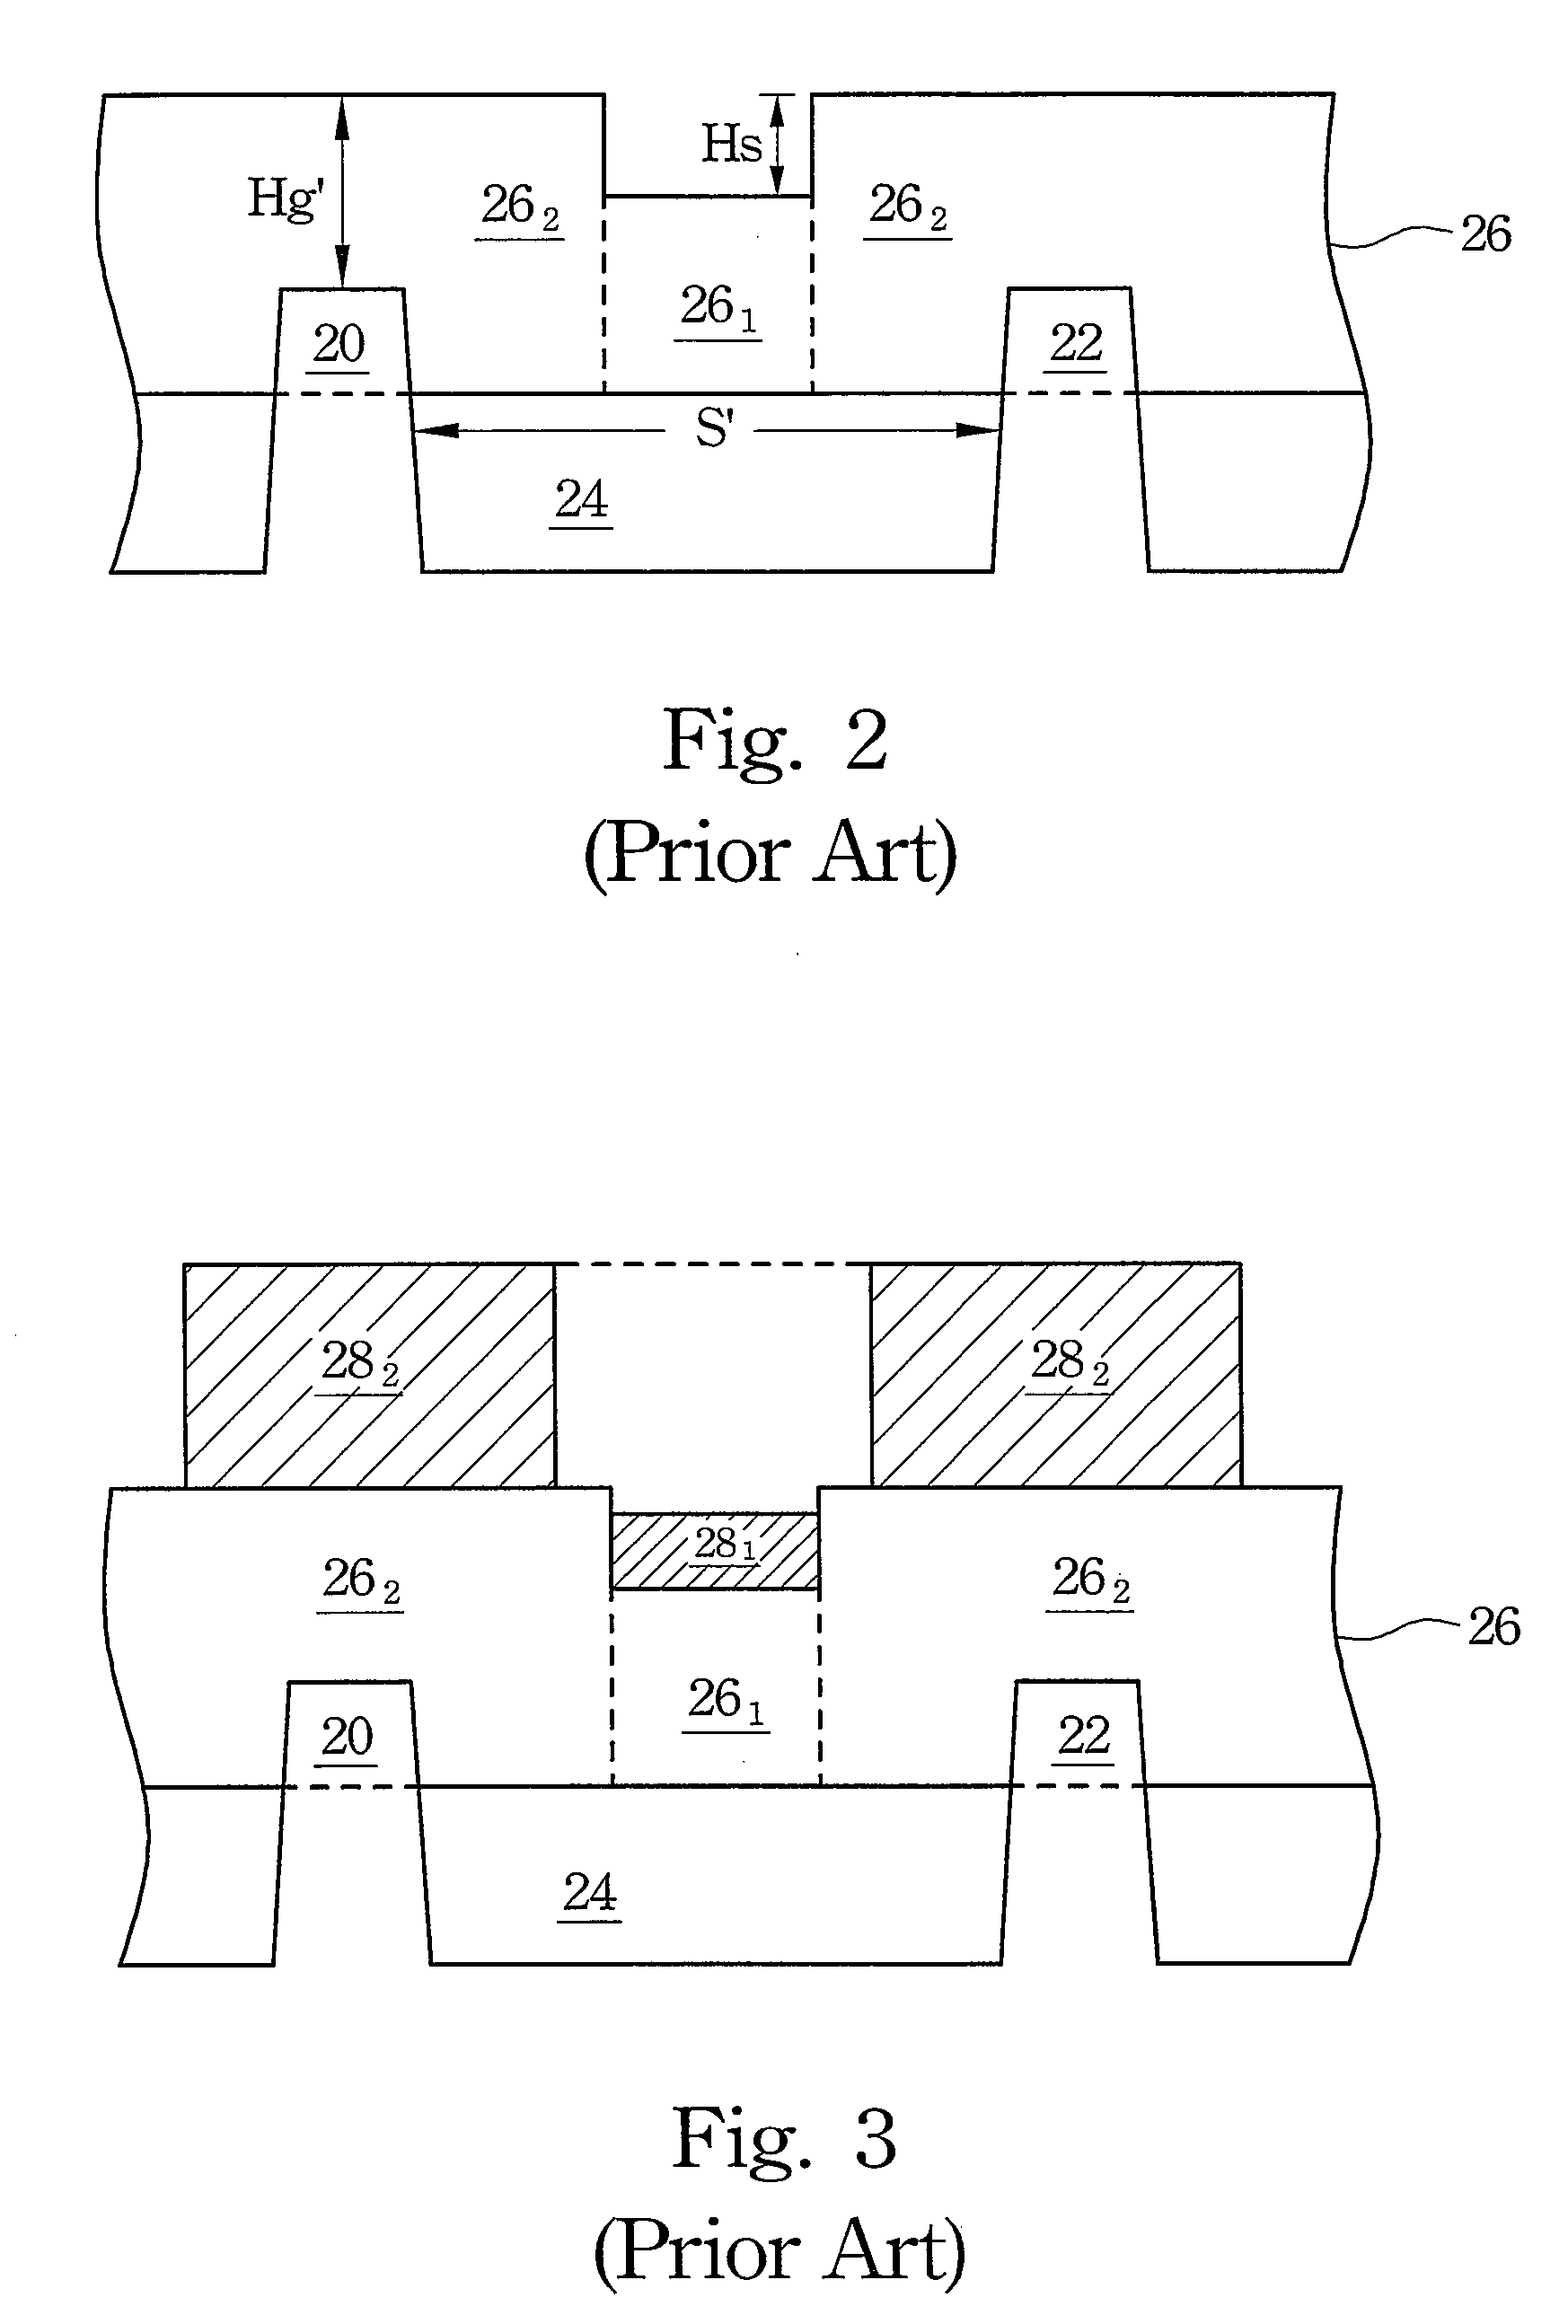 Integrated circuit structures with multiple FinFETs